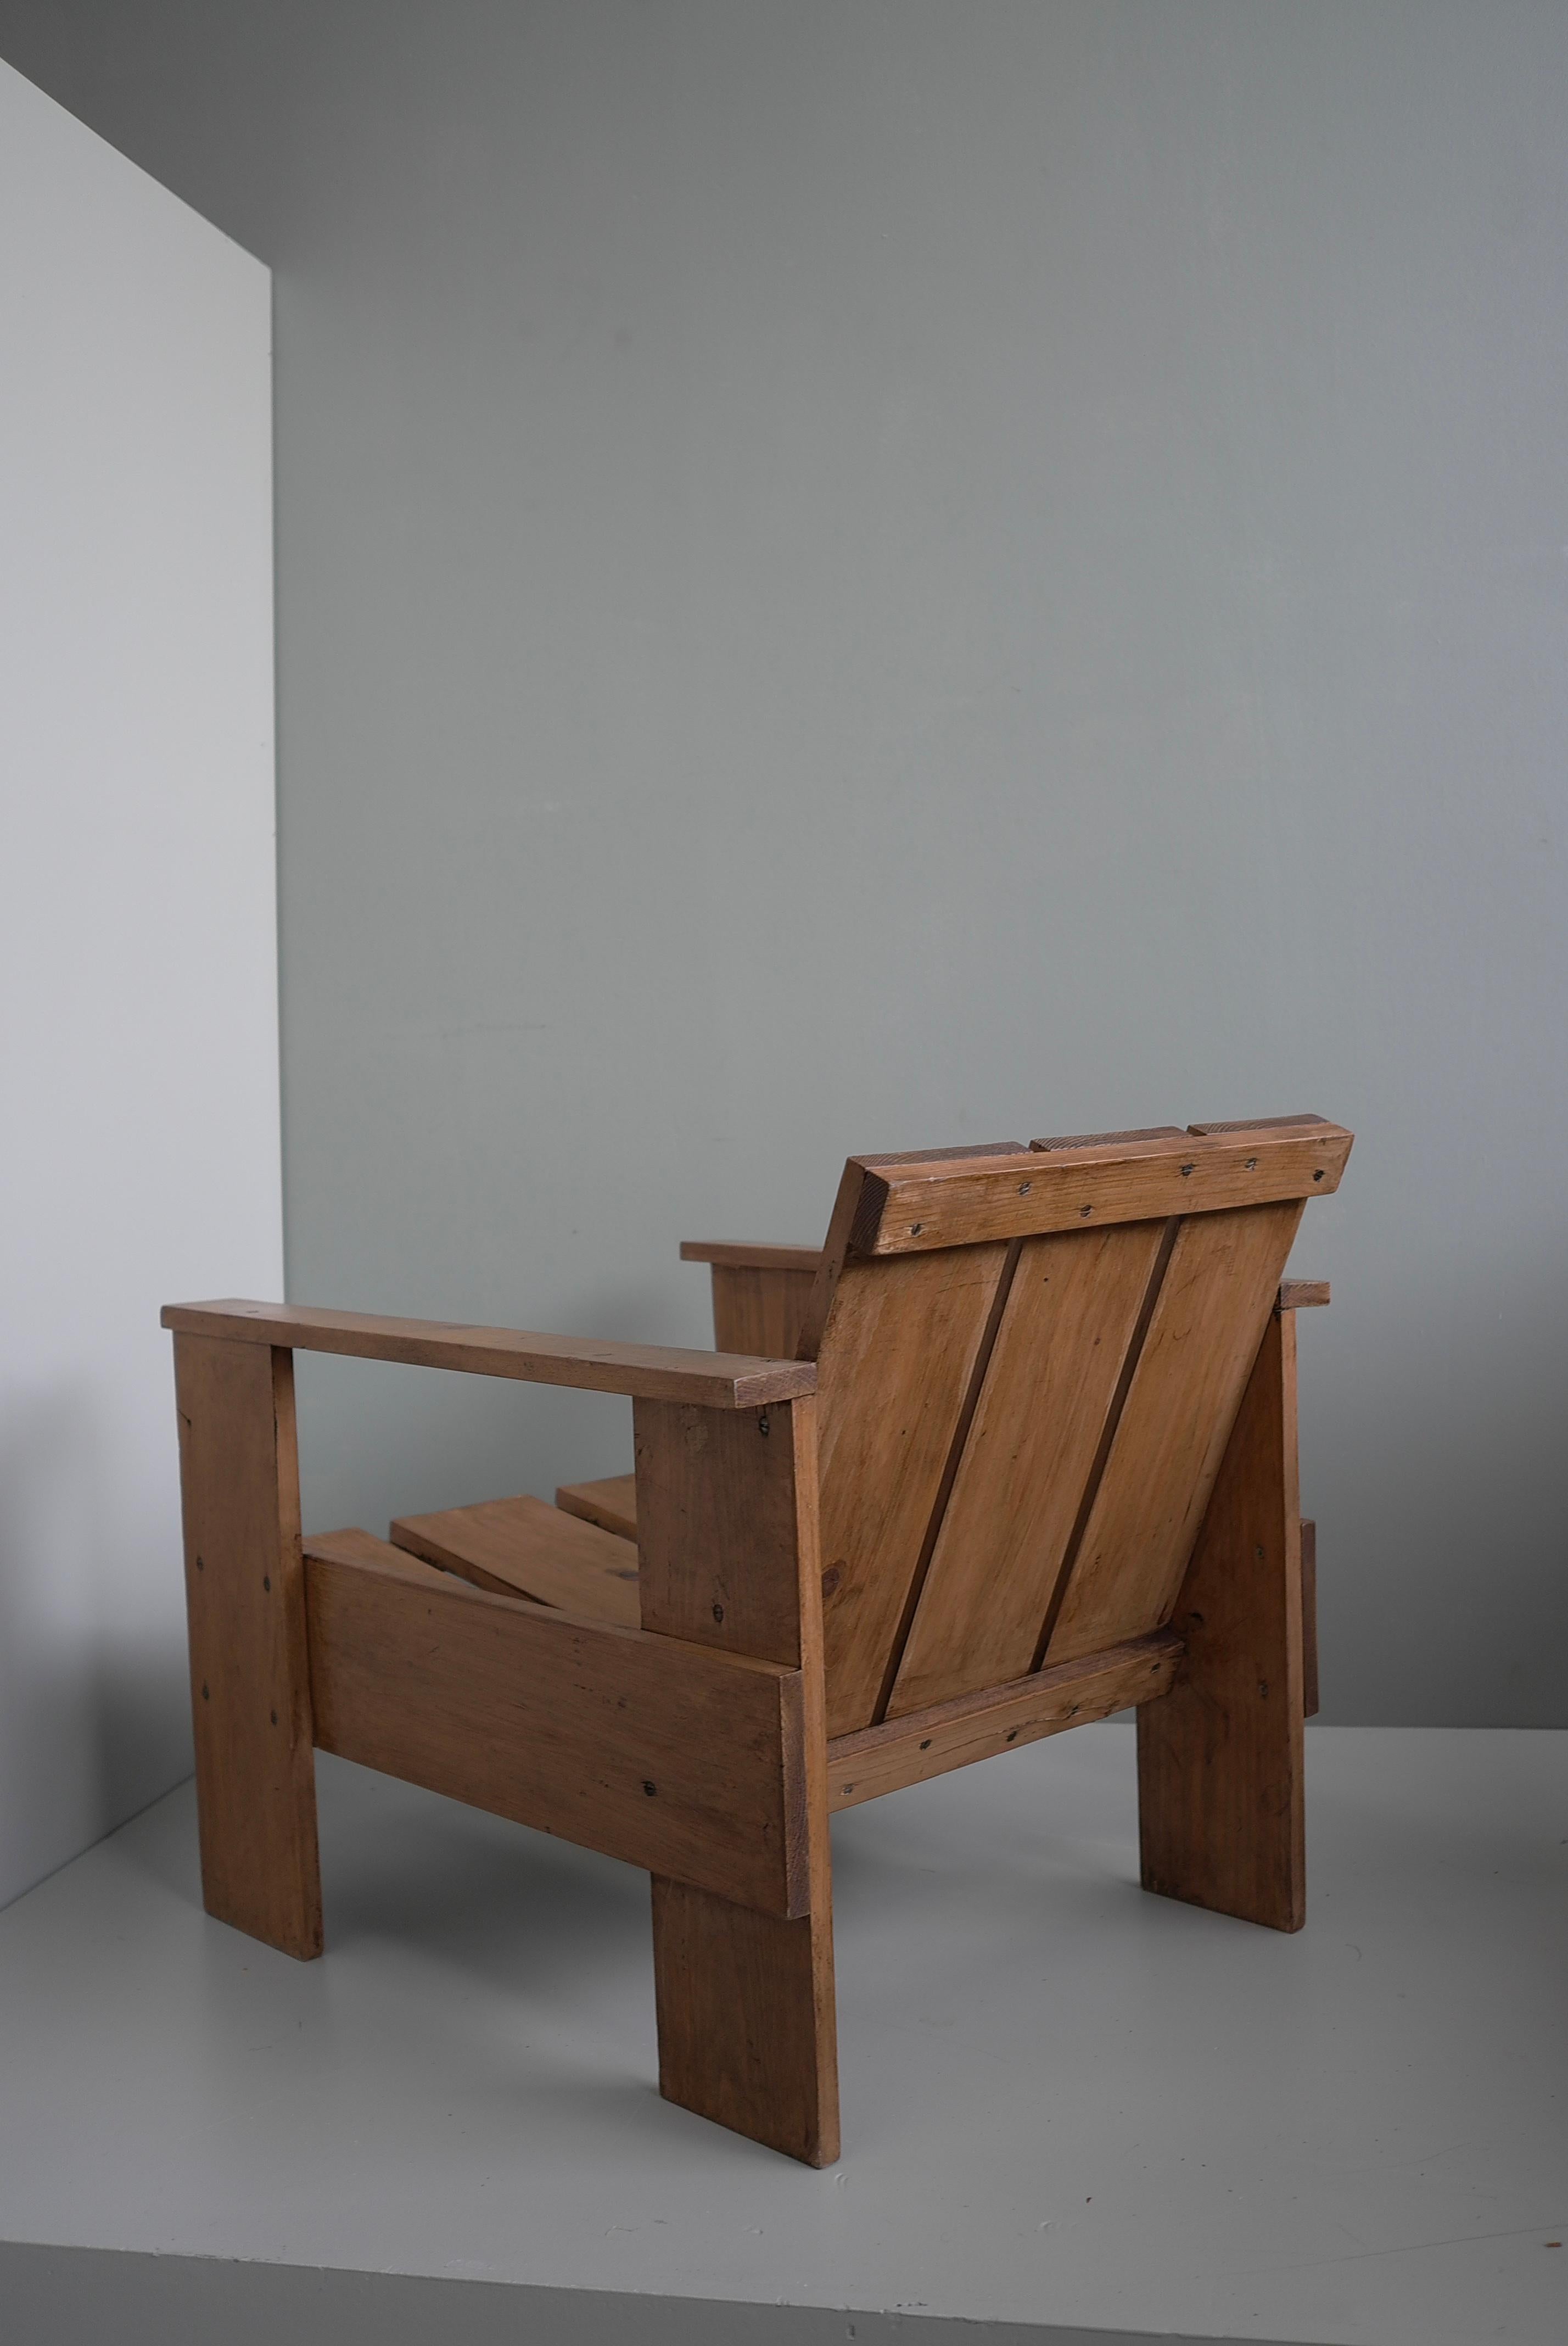 Crate Chair in style of Gerrit Rietveld, The Netherlands 1960's For Sale 11